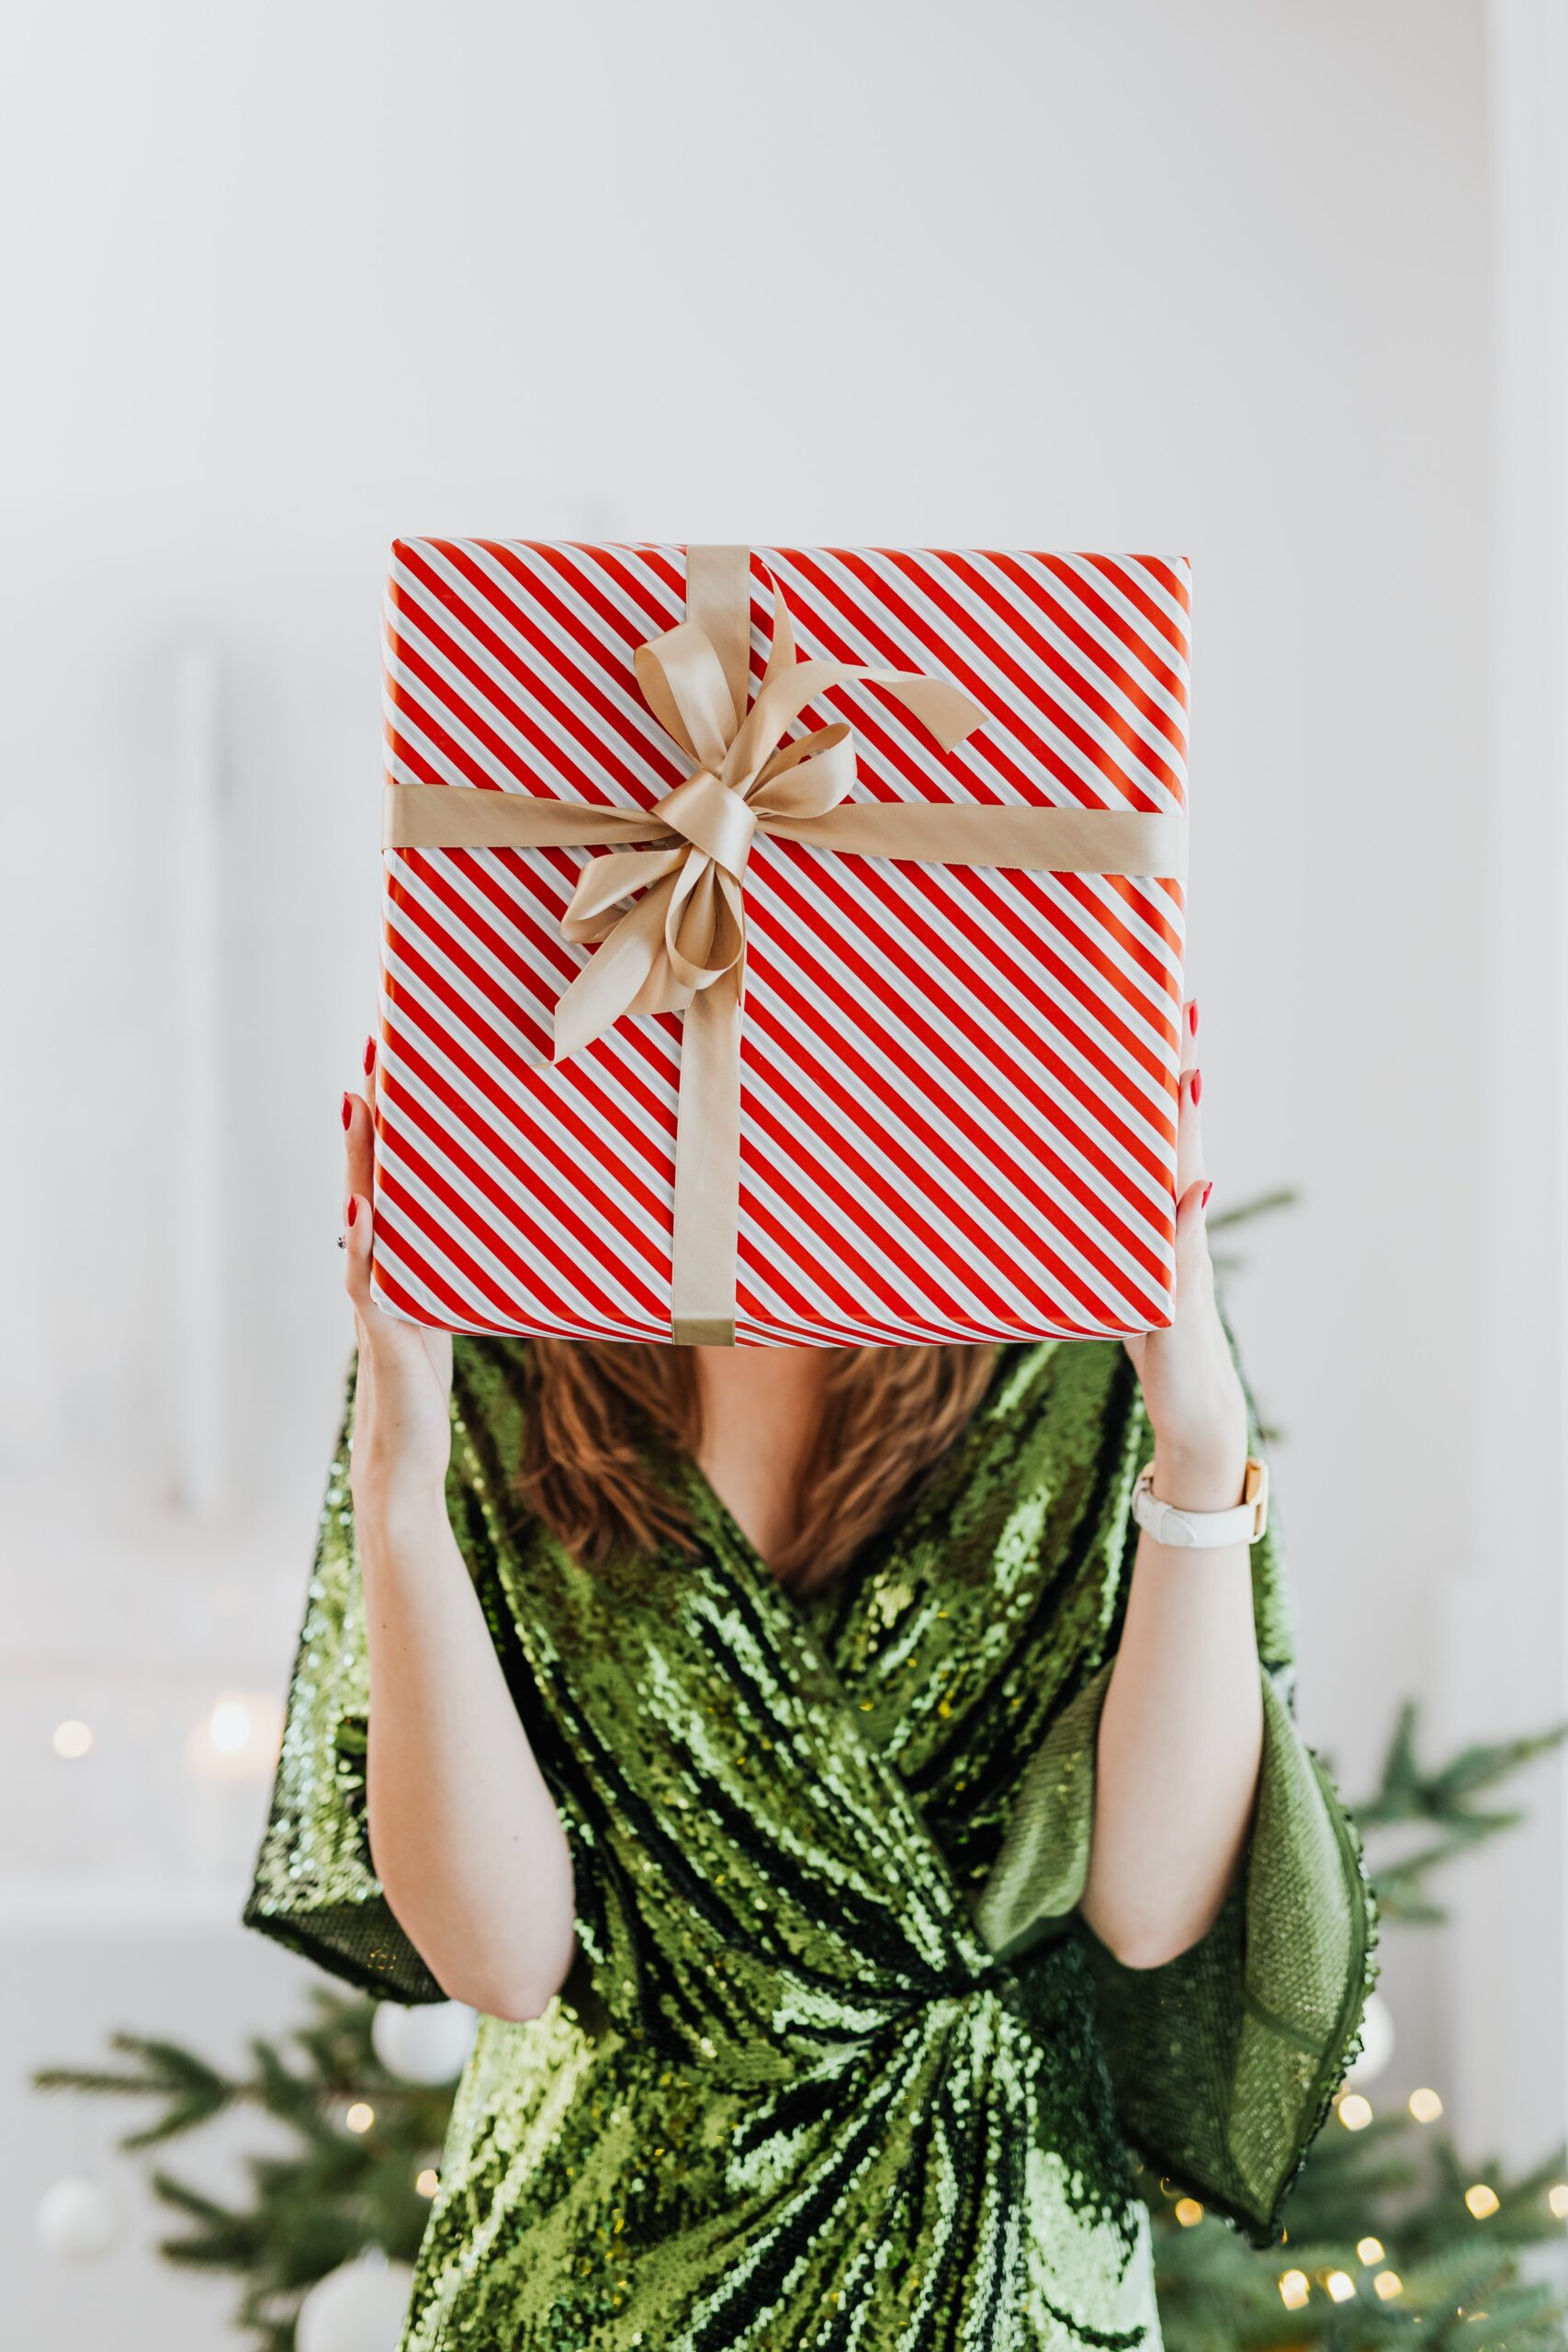 Image of a woman wearing a green sparkly dress holding a giant present wrapped in red and white wrapping paper with a gold bow in front of her face